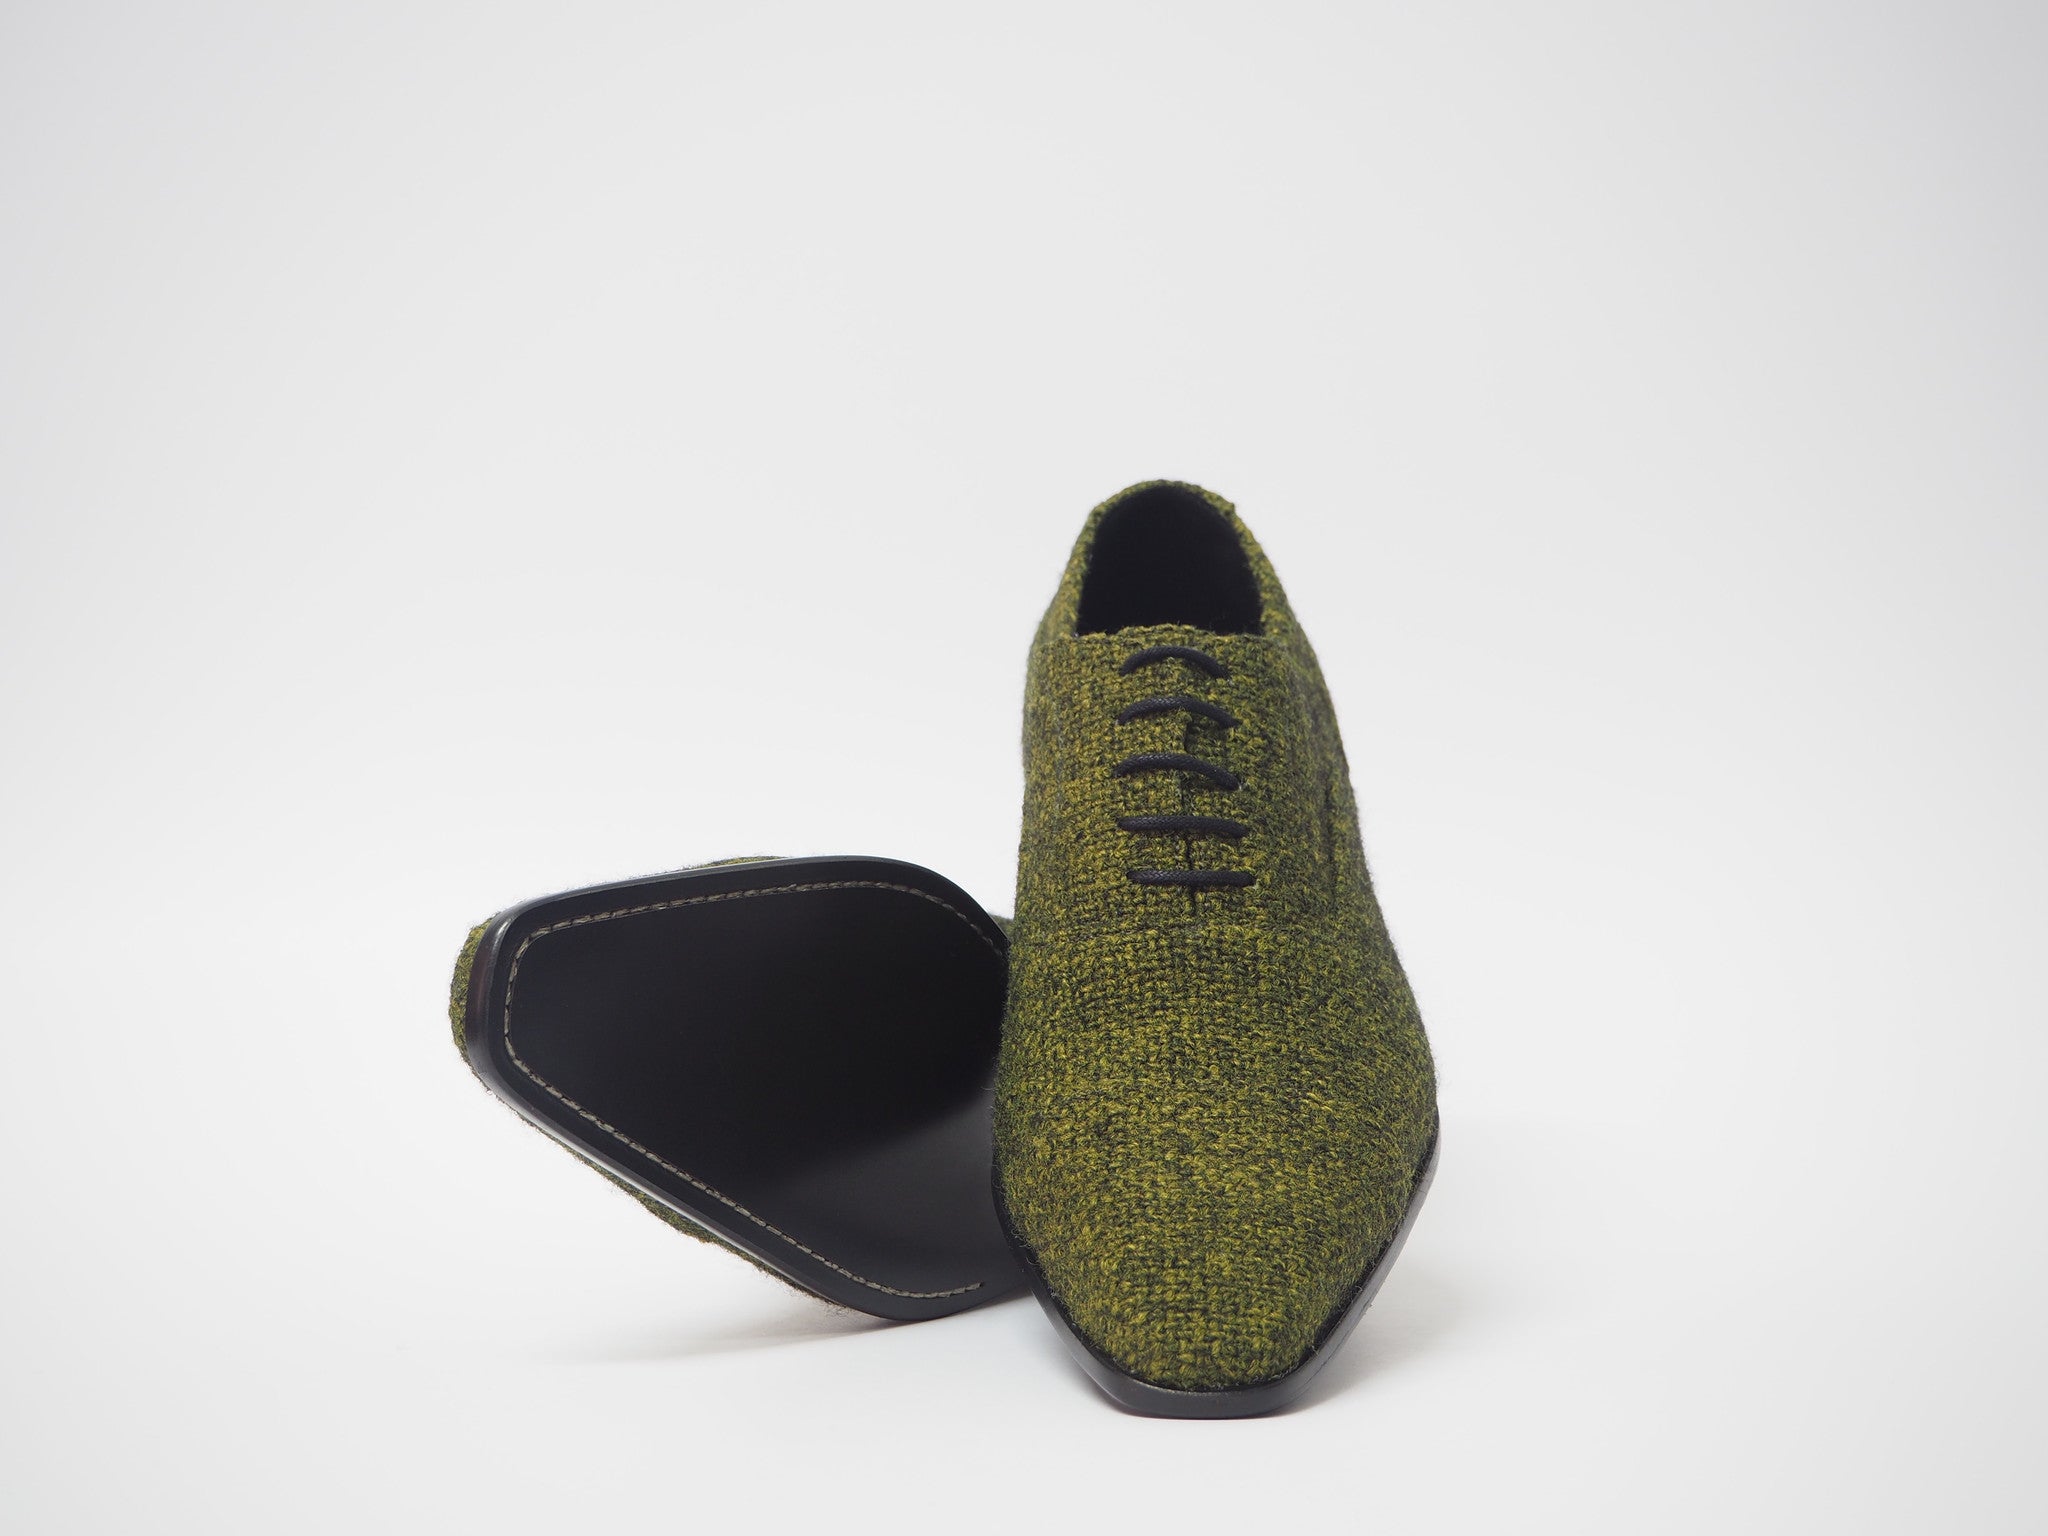 Size 45 - Olive Green Oxford